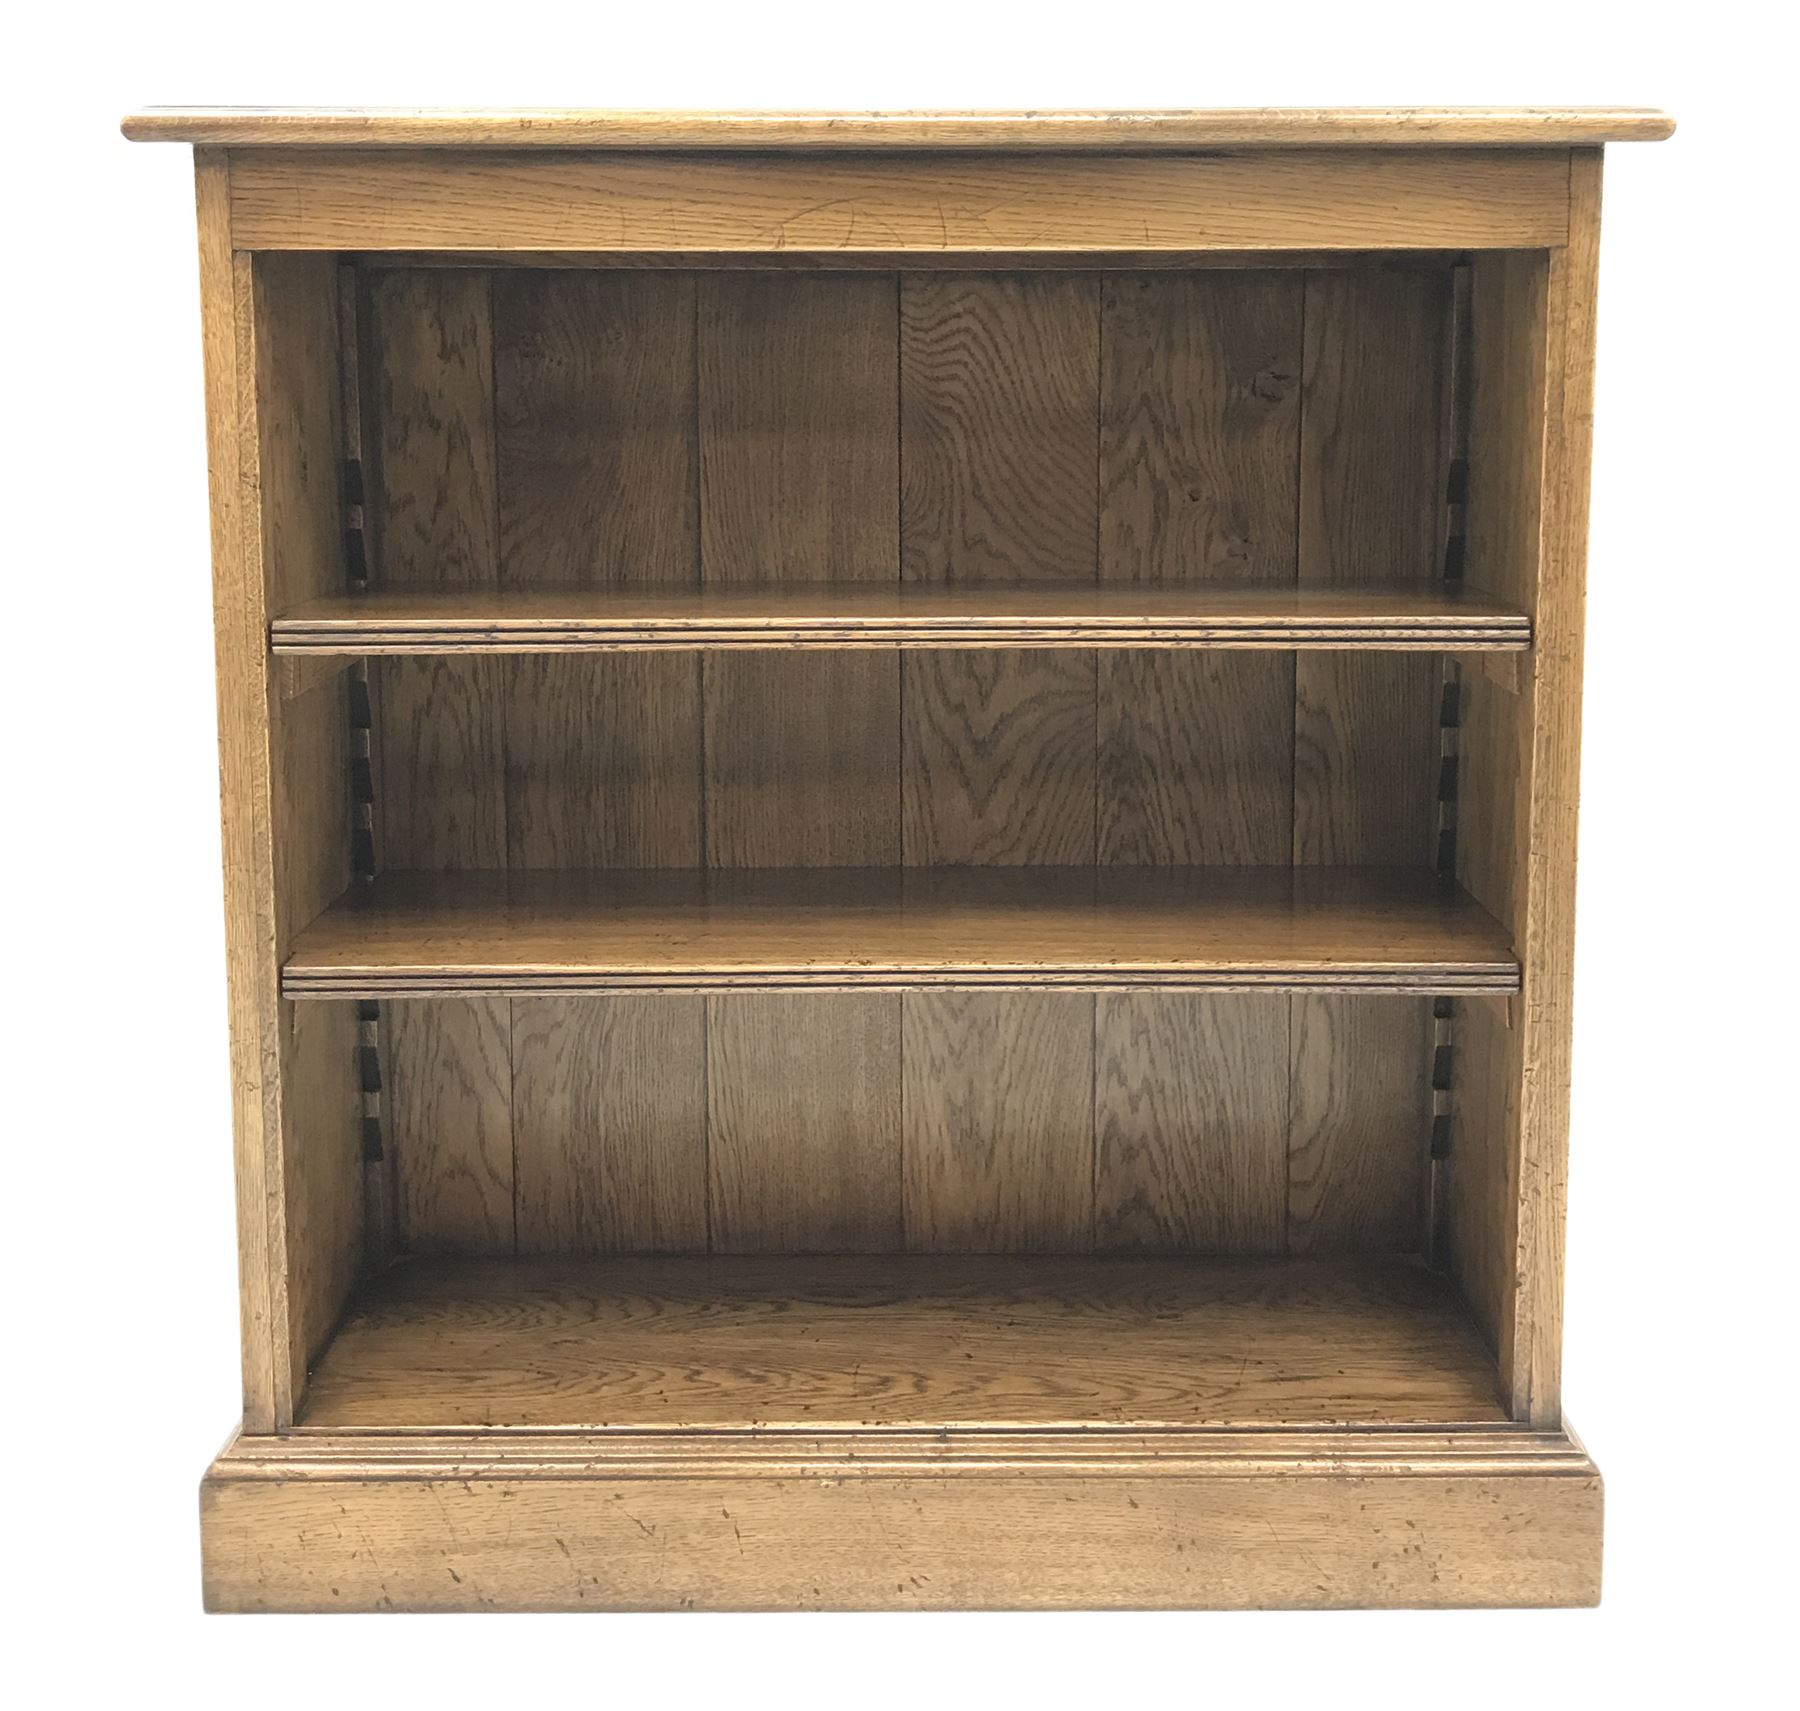 Distressed Light Oak Open Bookcase With, Light Oak Bookcase With Adjustable Shelves